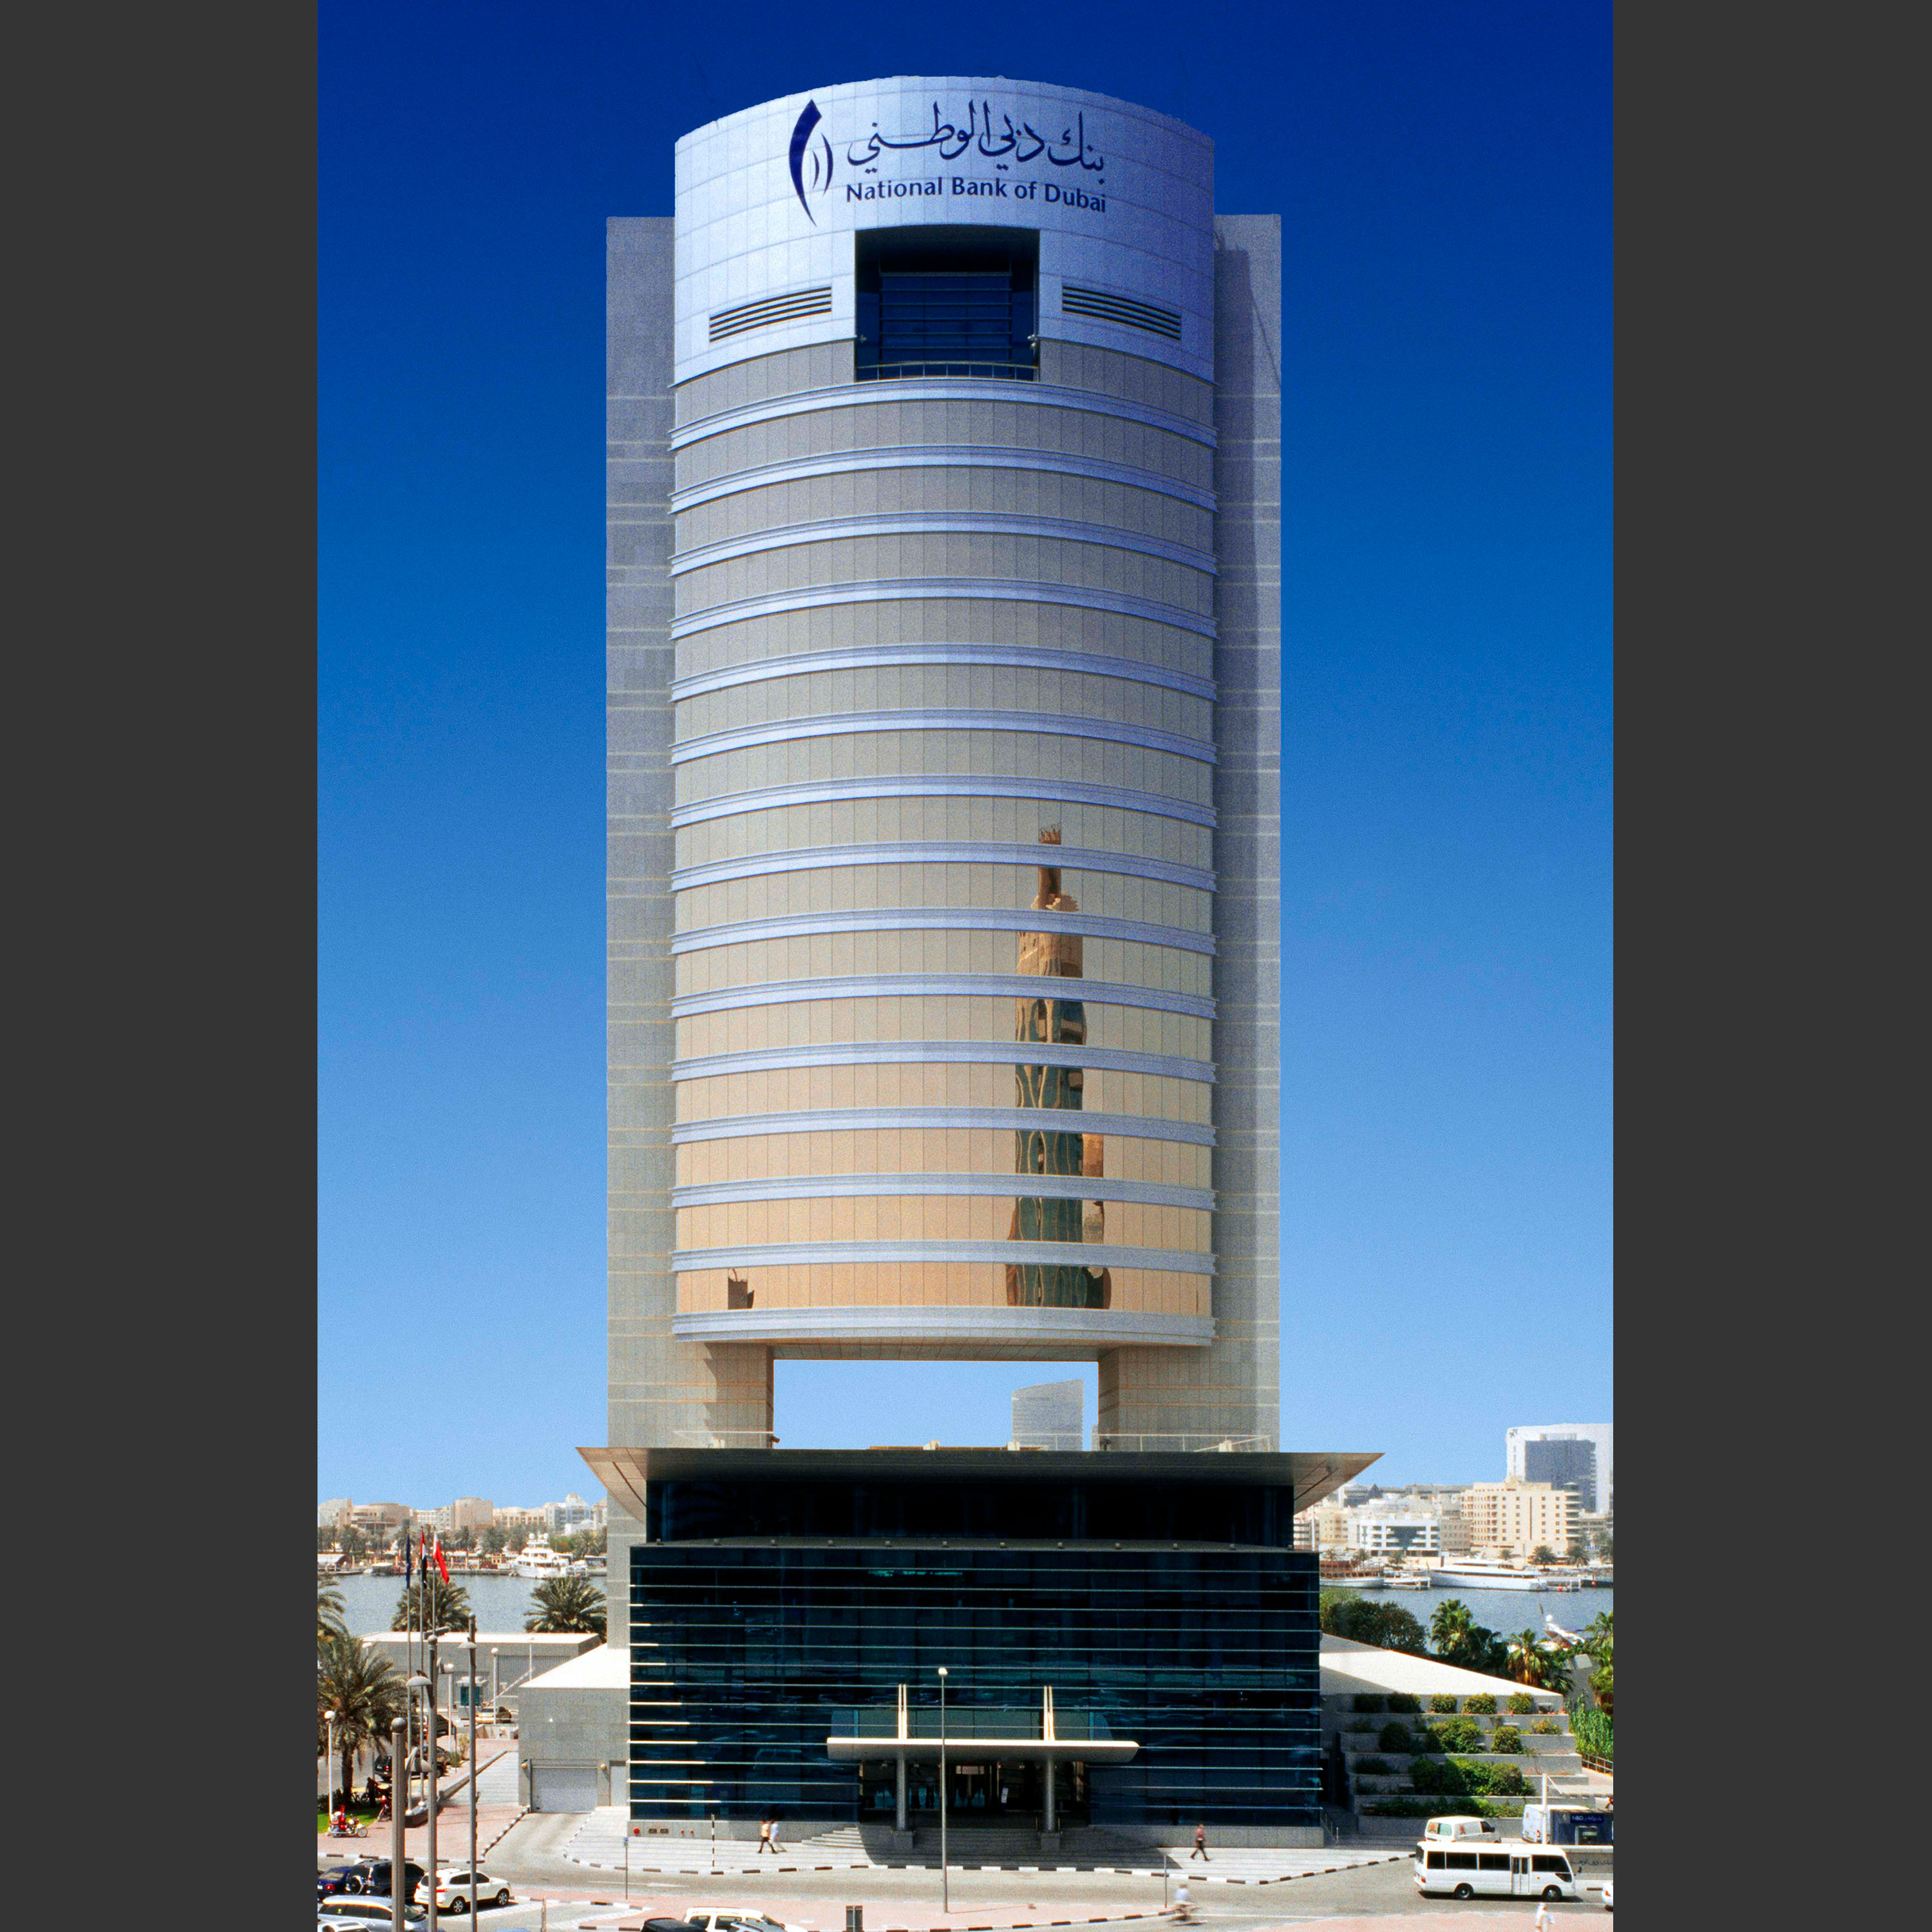 Emirates Nbd Headquaters Norr Group Integrated Design Architects Engineers And Planners 6143